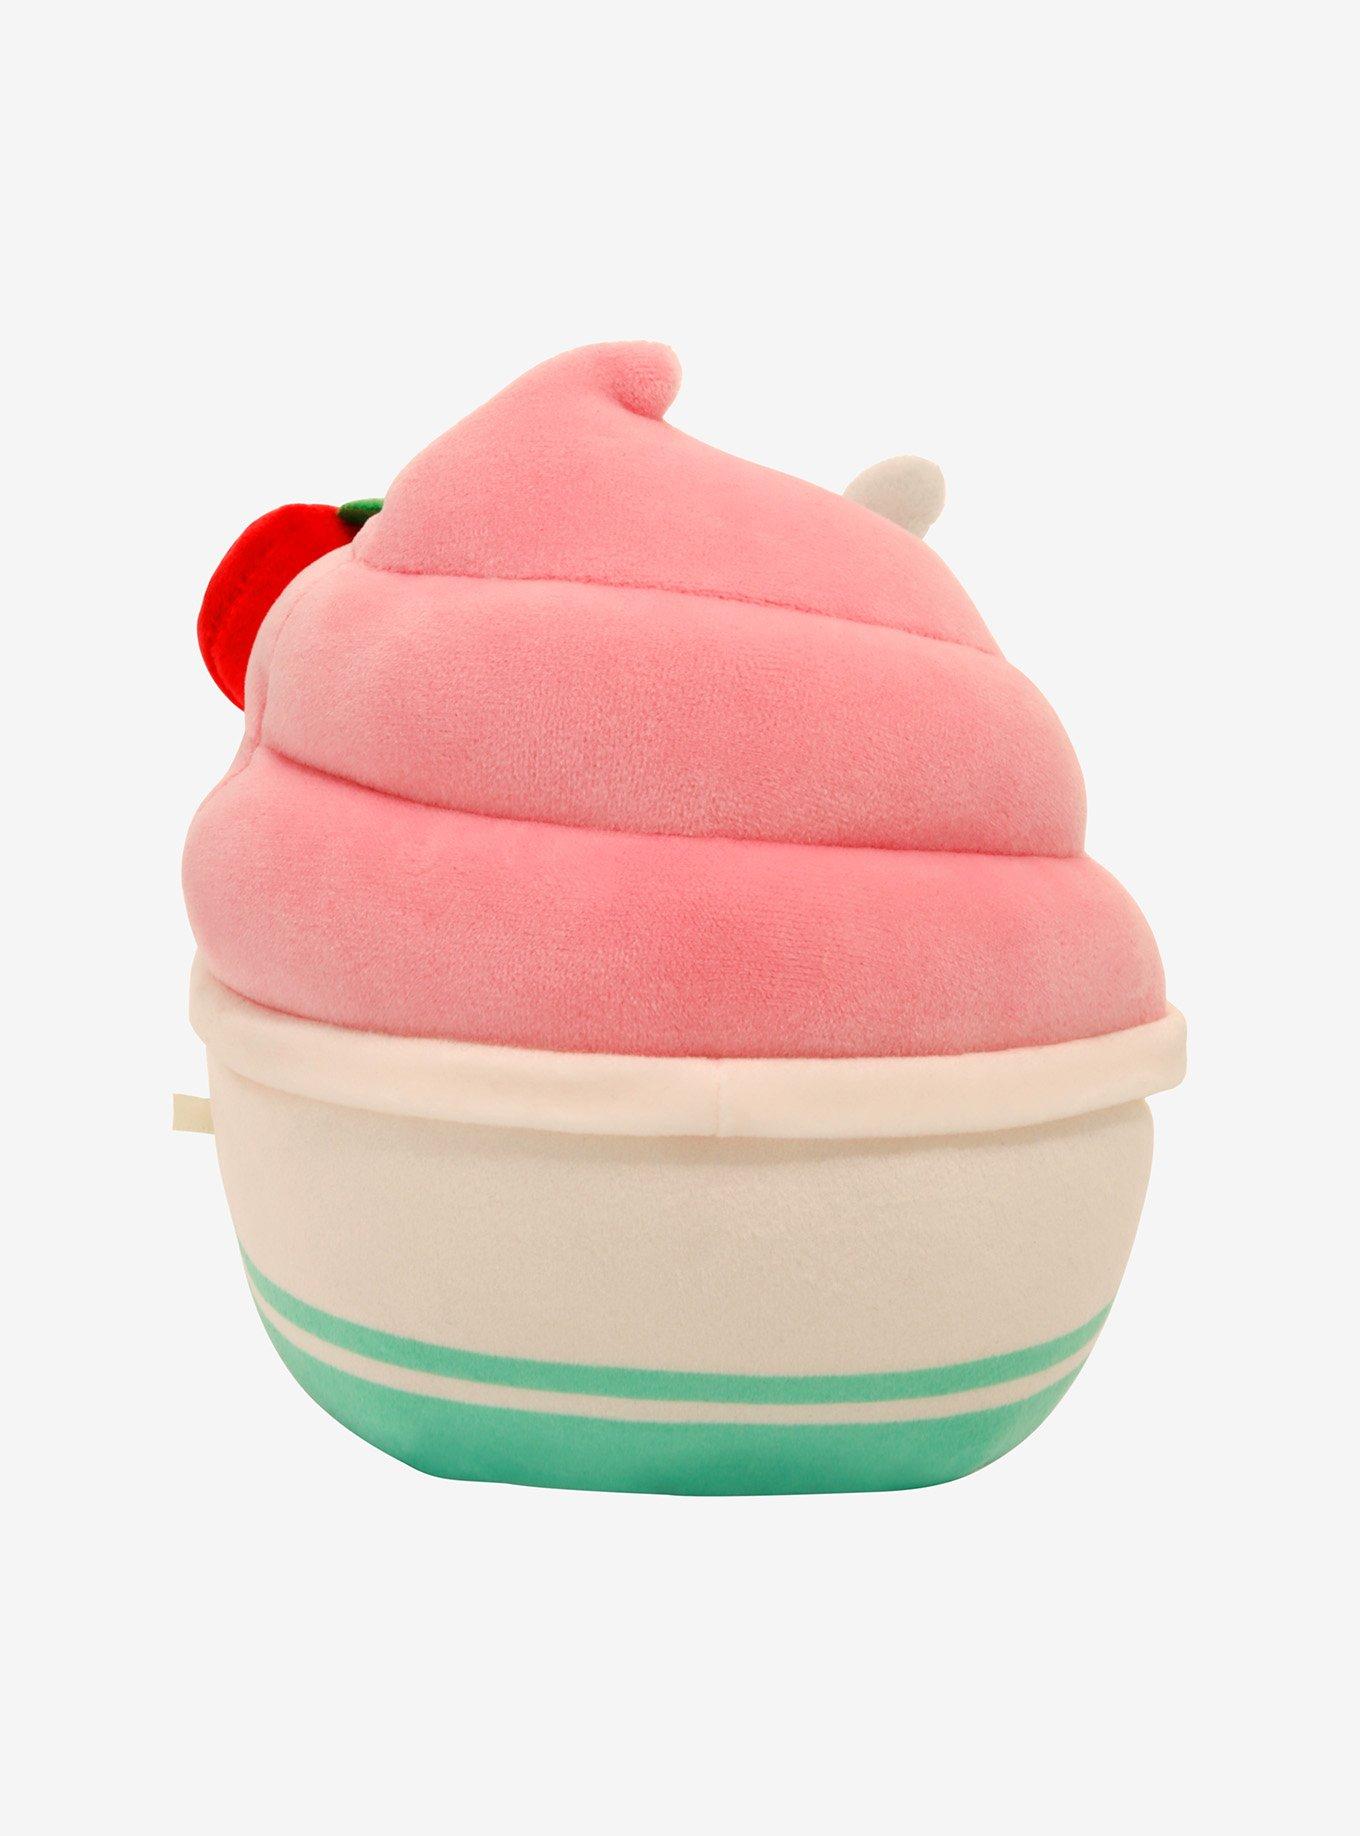 Squishmallows Sweets Scented Assorted Blind Plush, , alternate